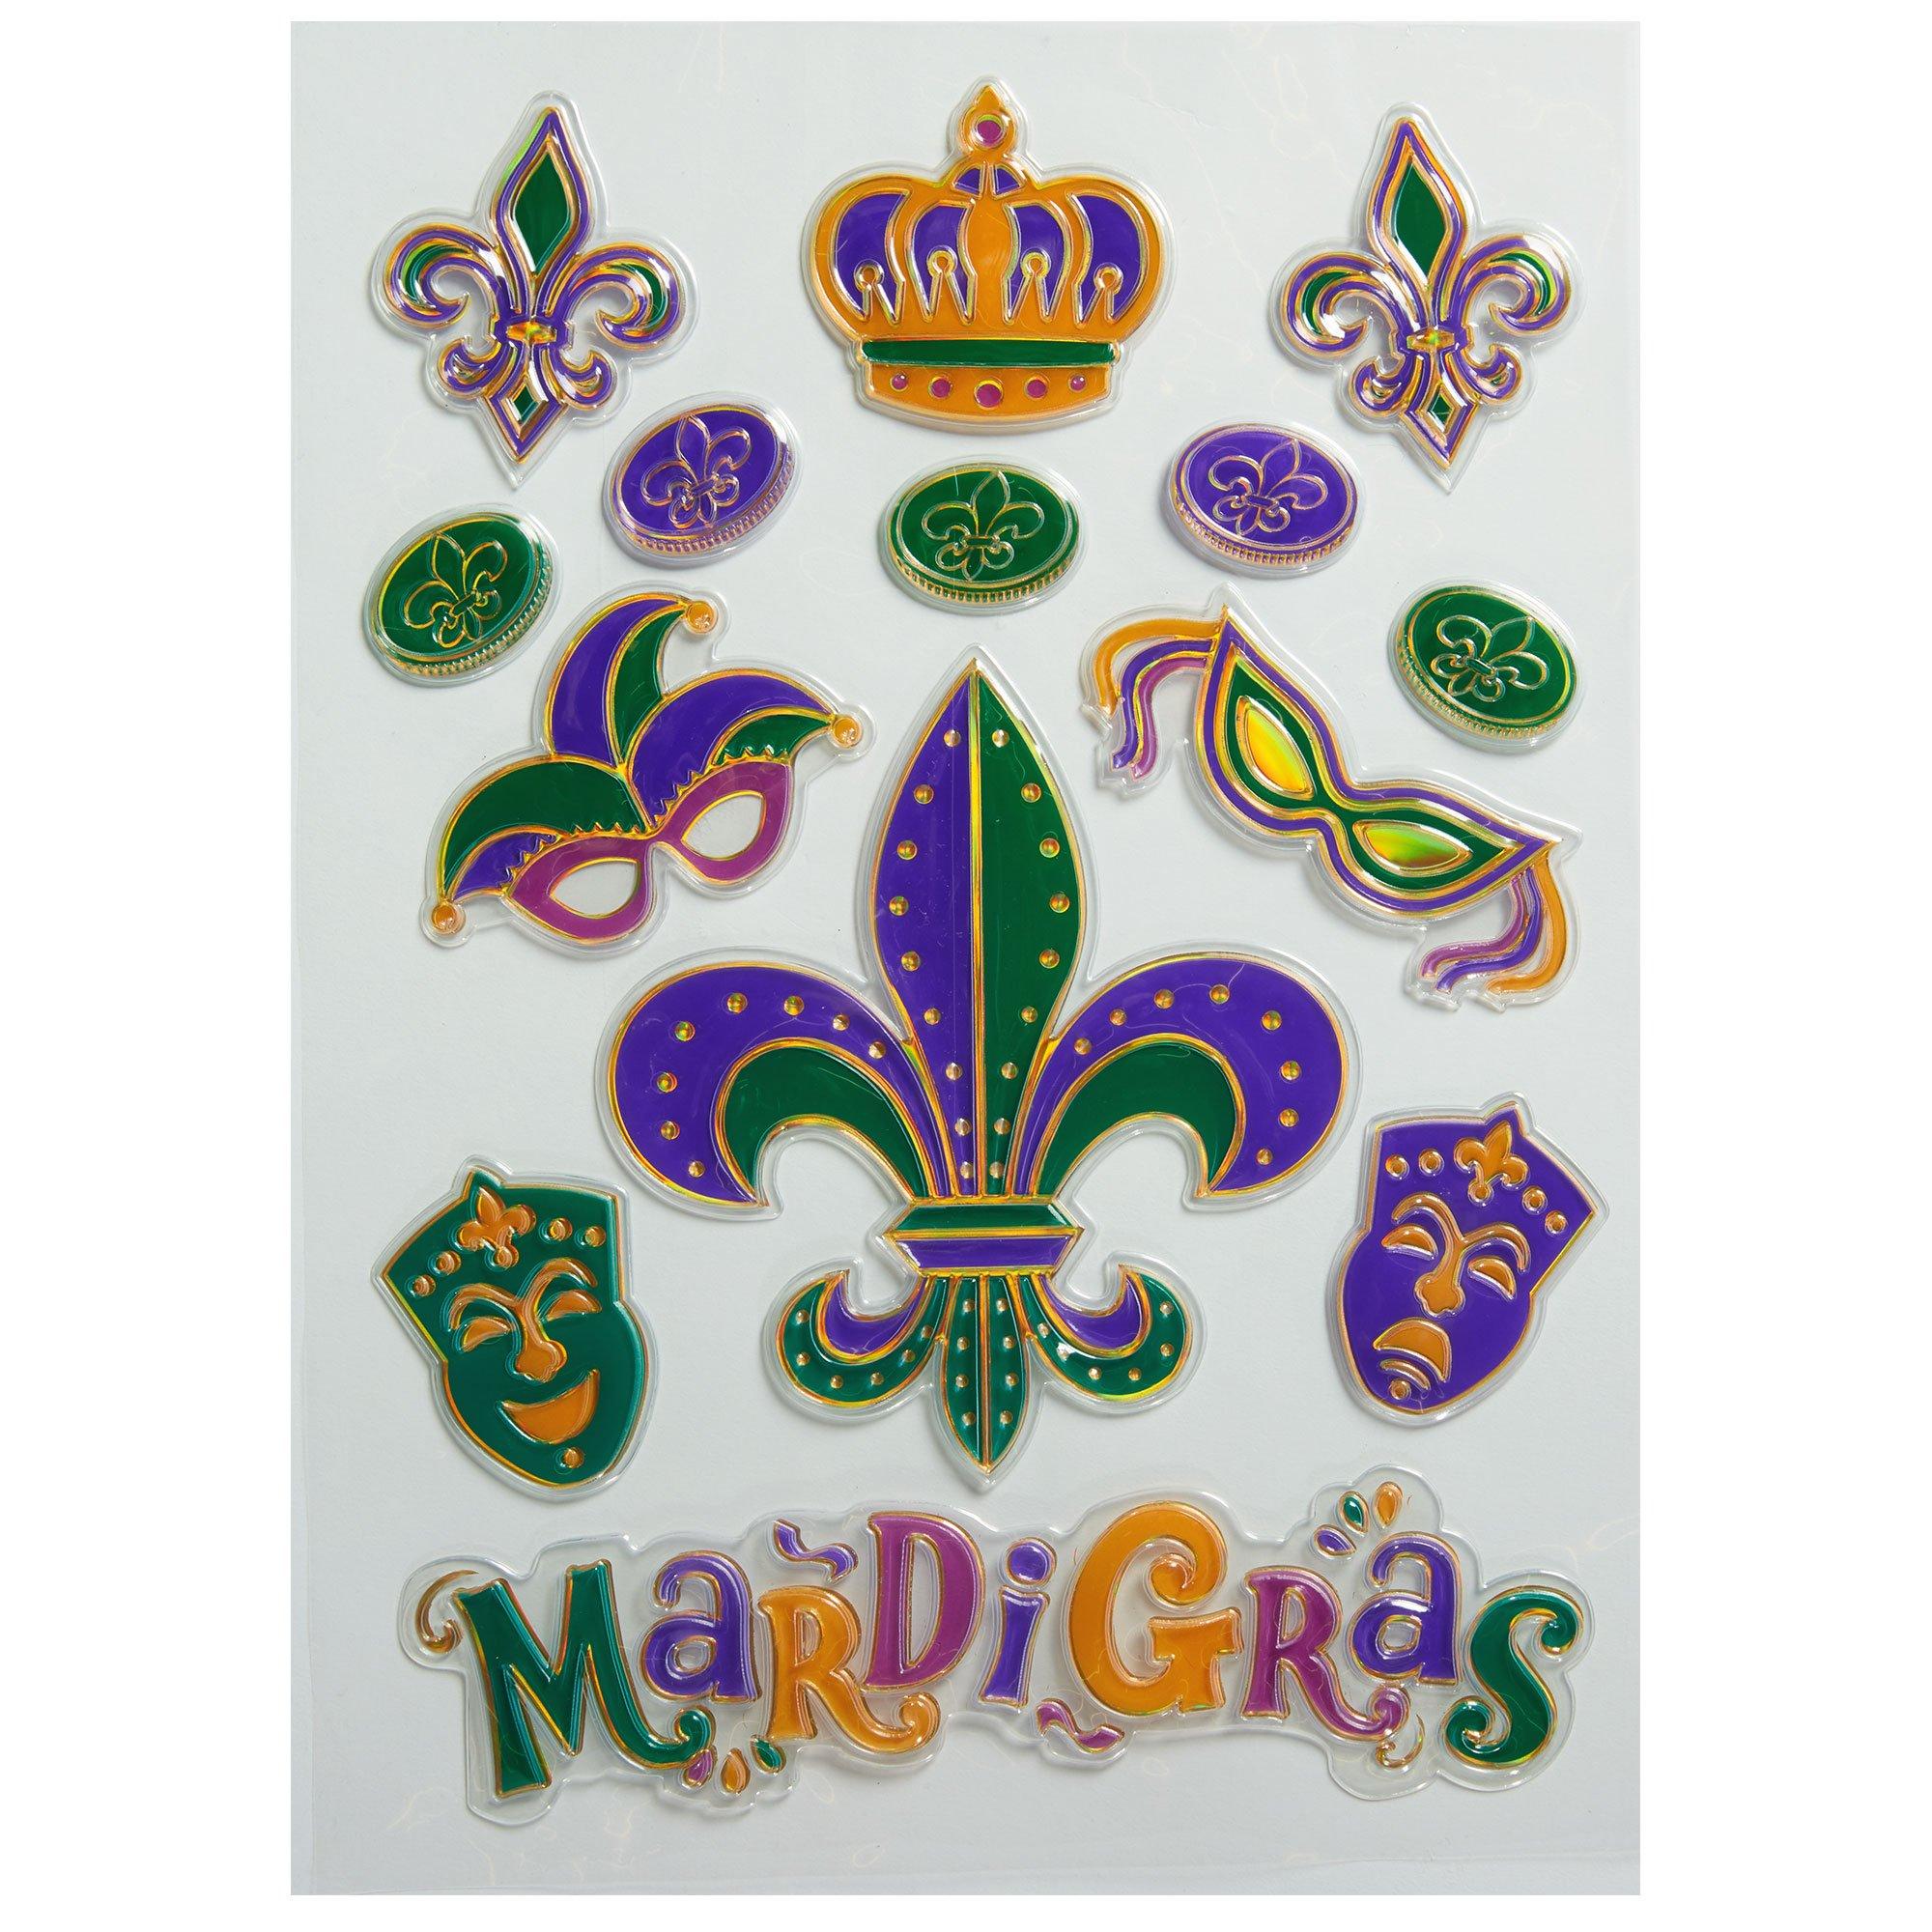 9 Sheets Mardi Gras Window Clings Static Stickers Decal For Wall Glass Car Mardi  Gras Party Carnivel Masquerade Decoration